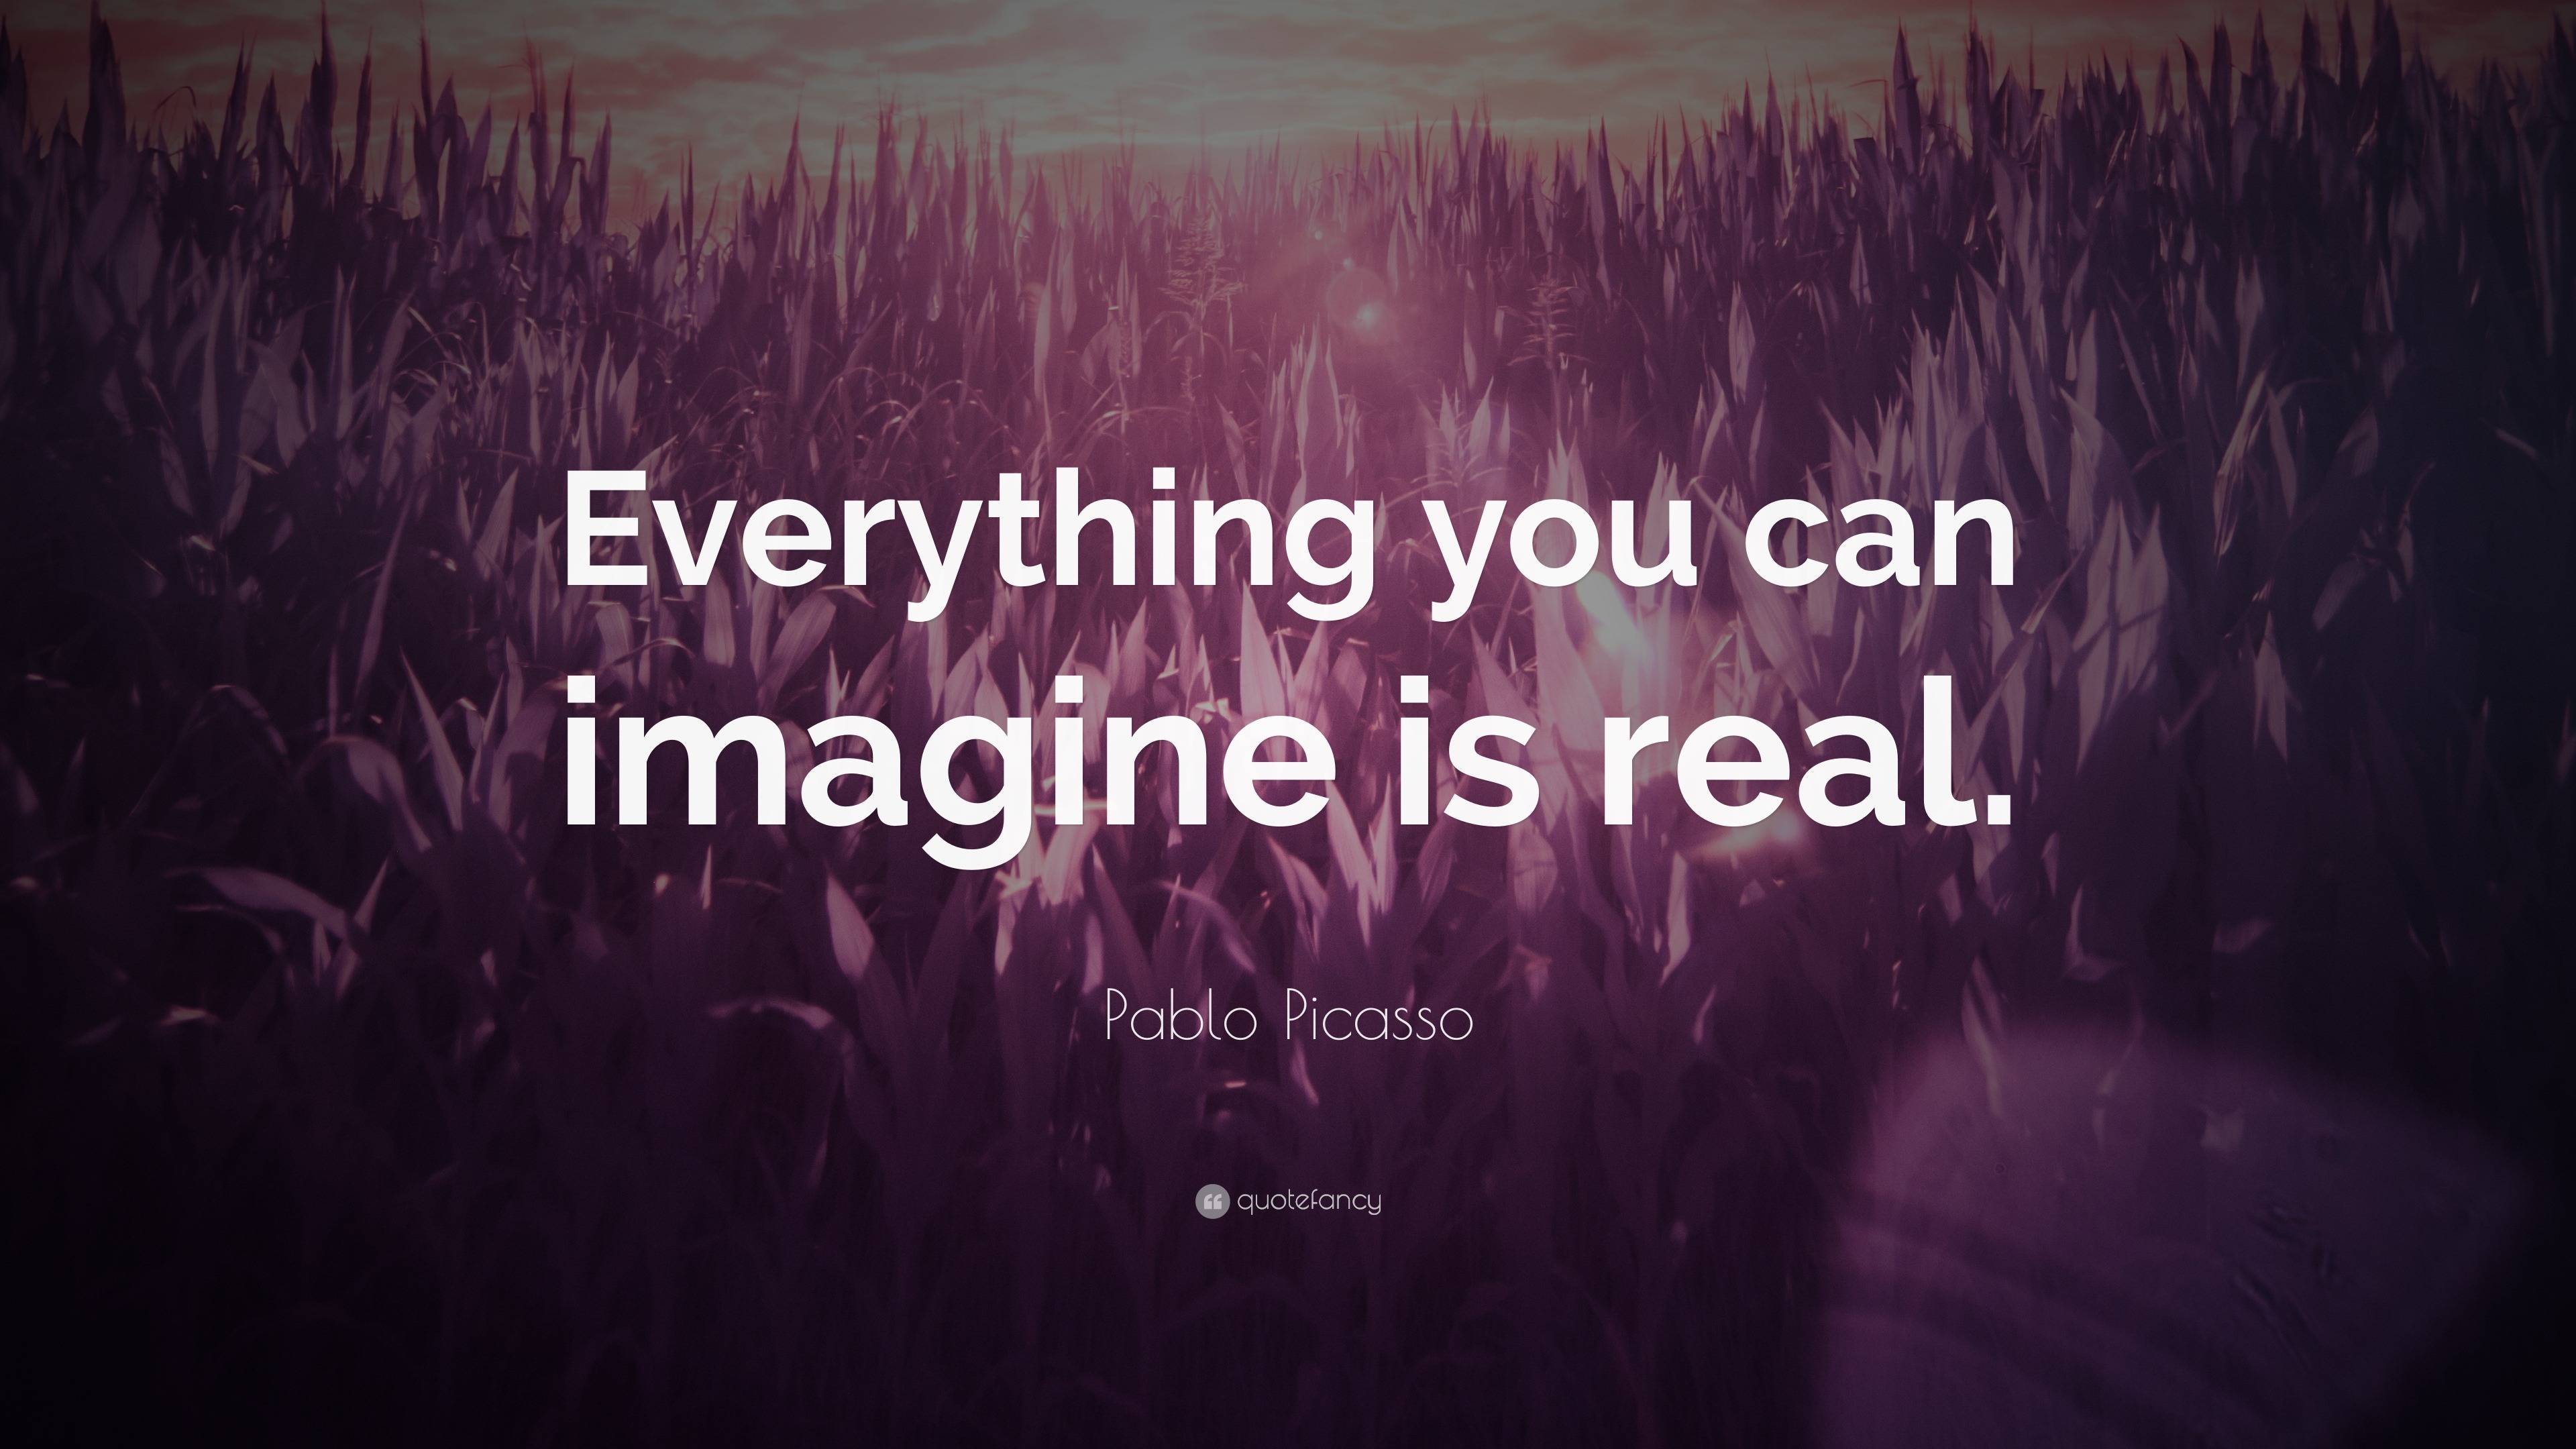 Real everything. Everything you can imagine is real Picasso. Everything you imagine is real. Everything you can imagine. You can imagine is real.